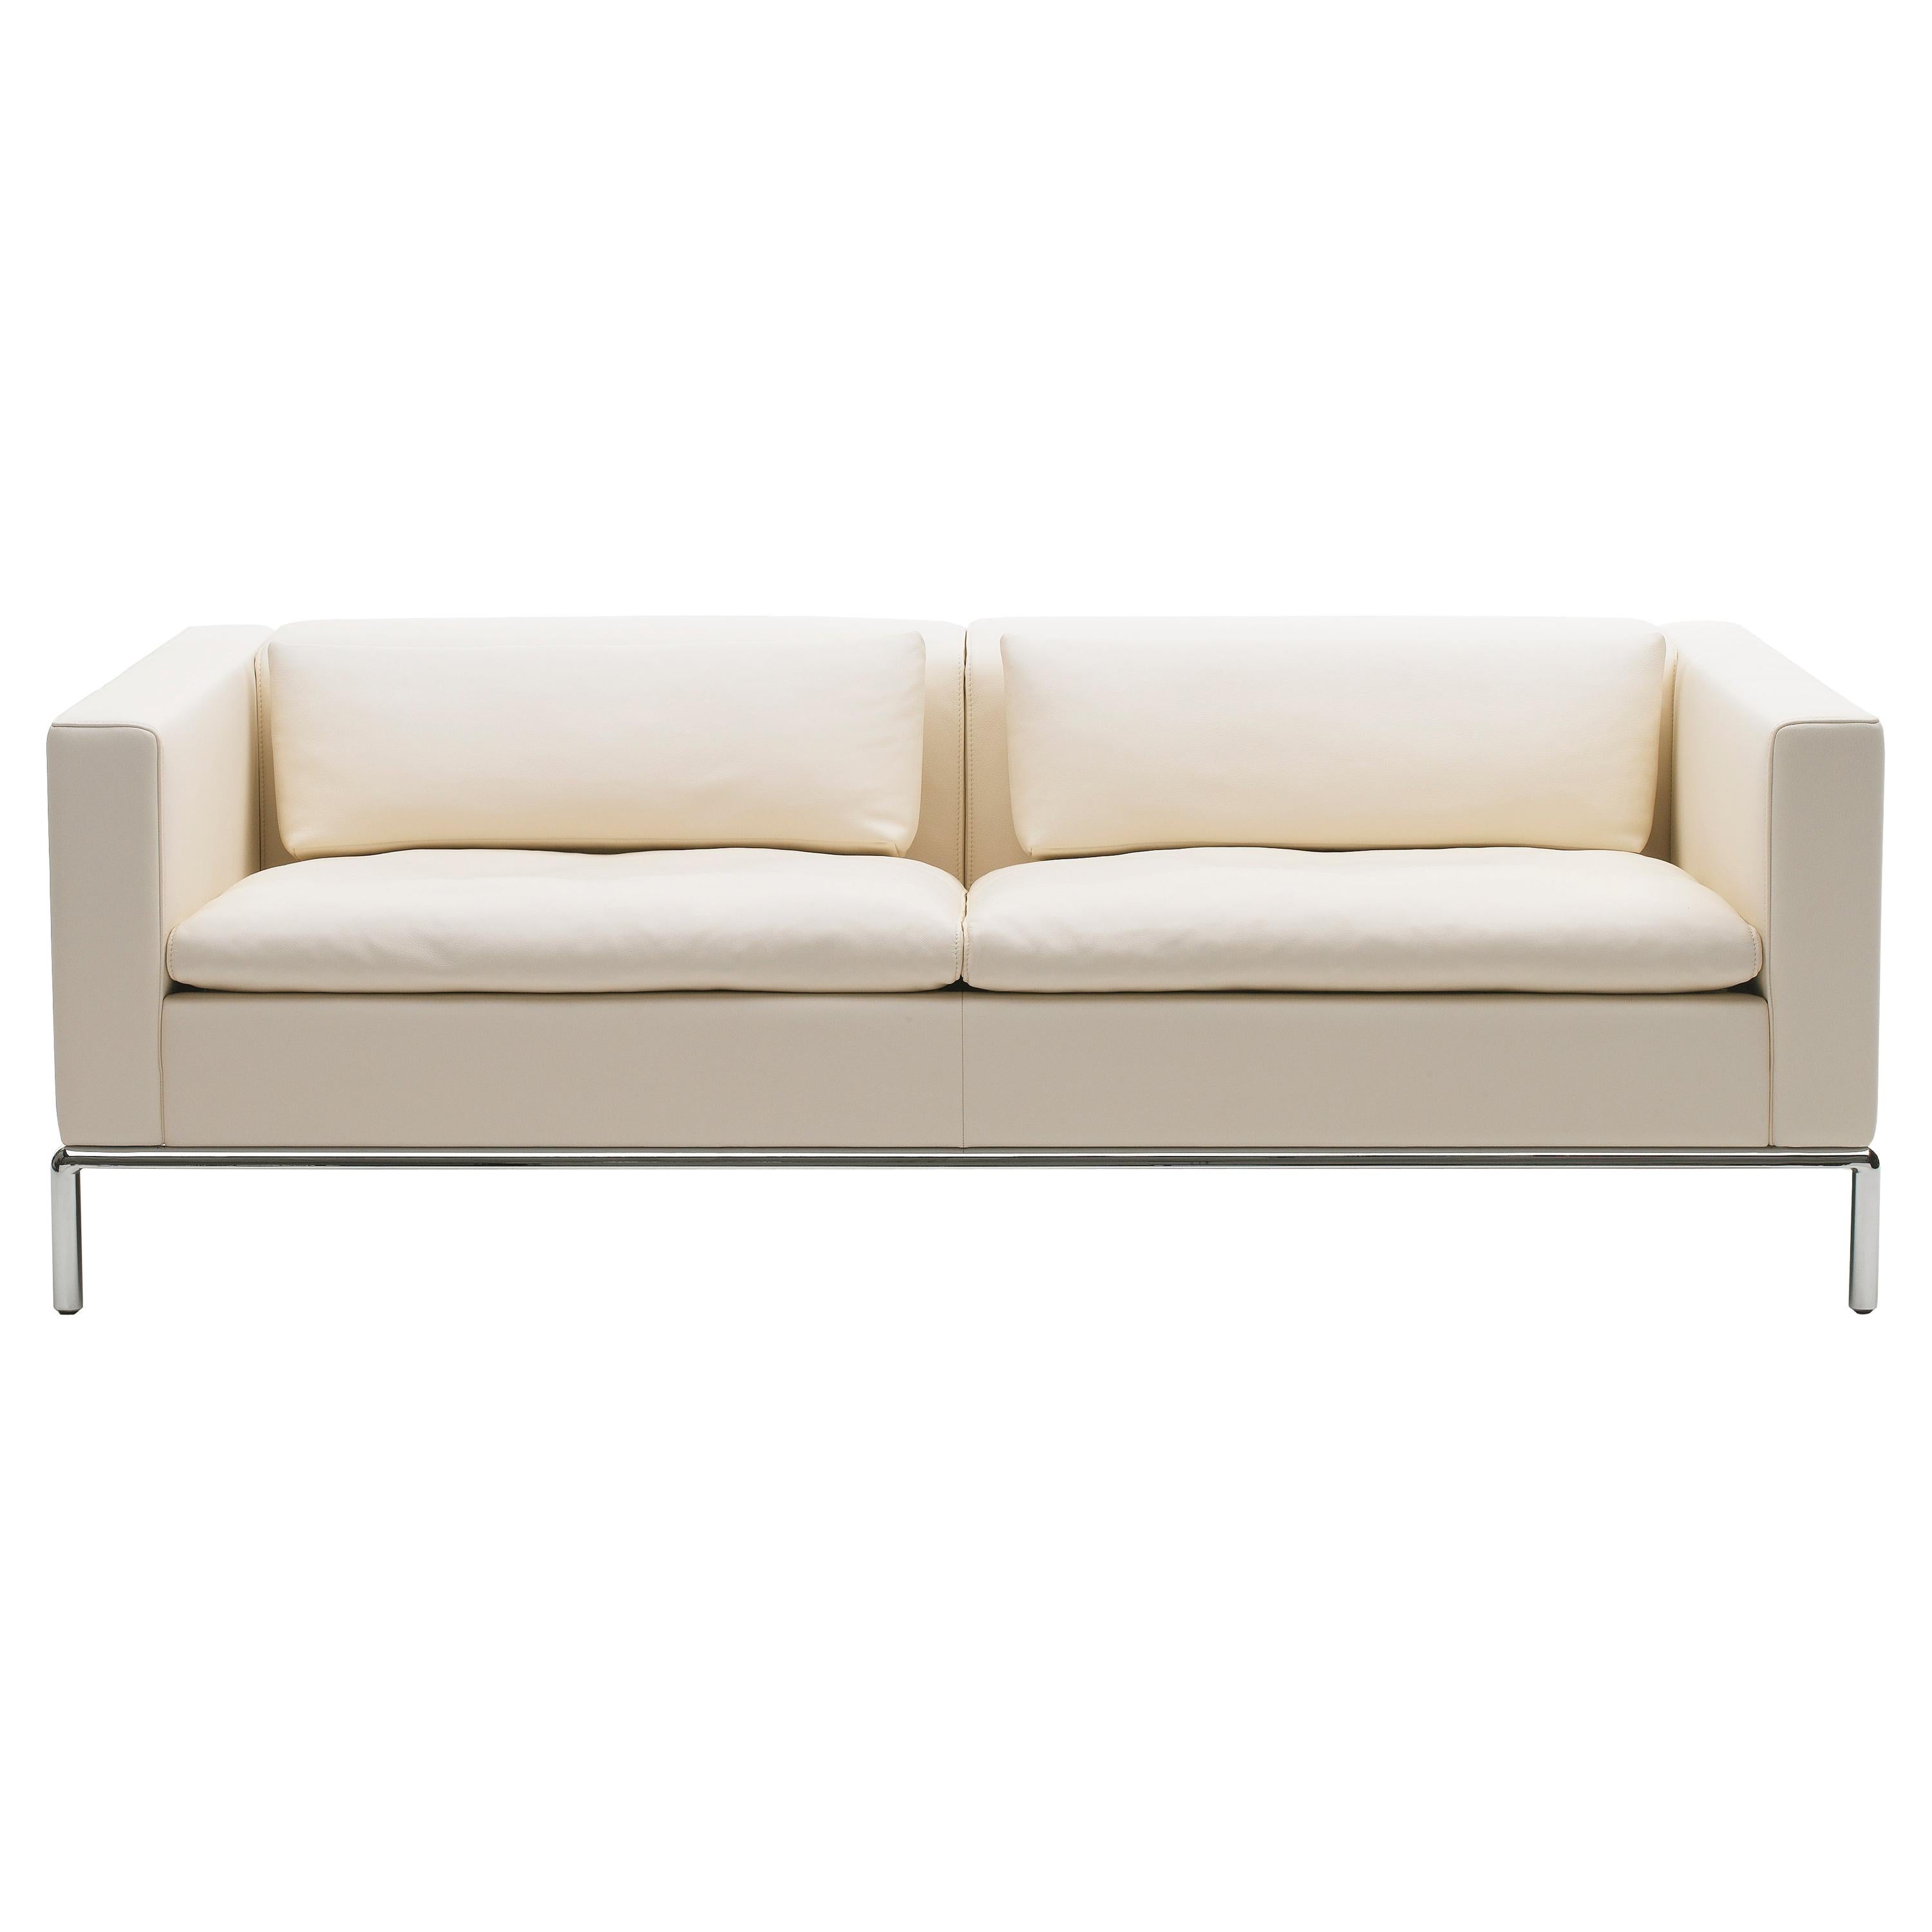 Set of DS-5 Sofa and Cushions by De Sede